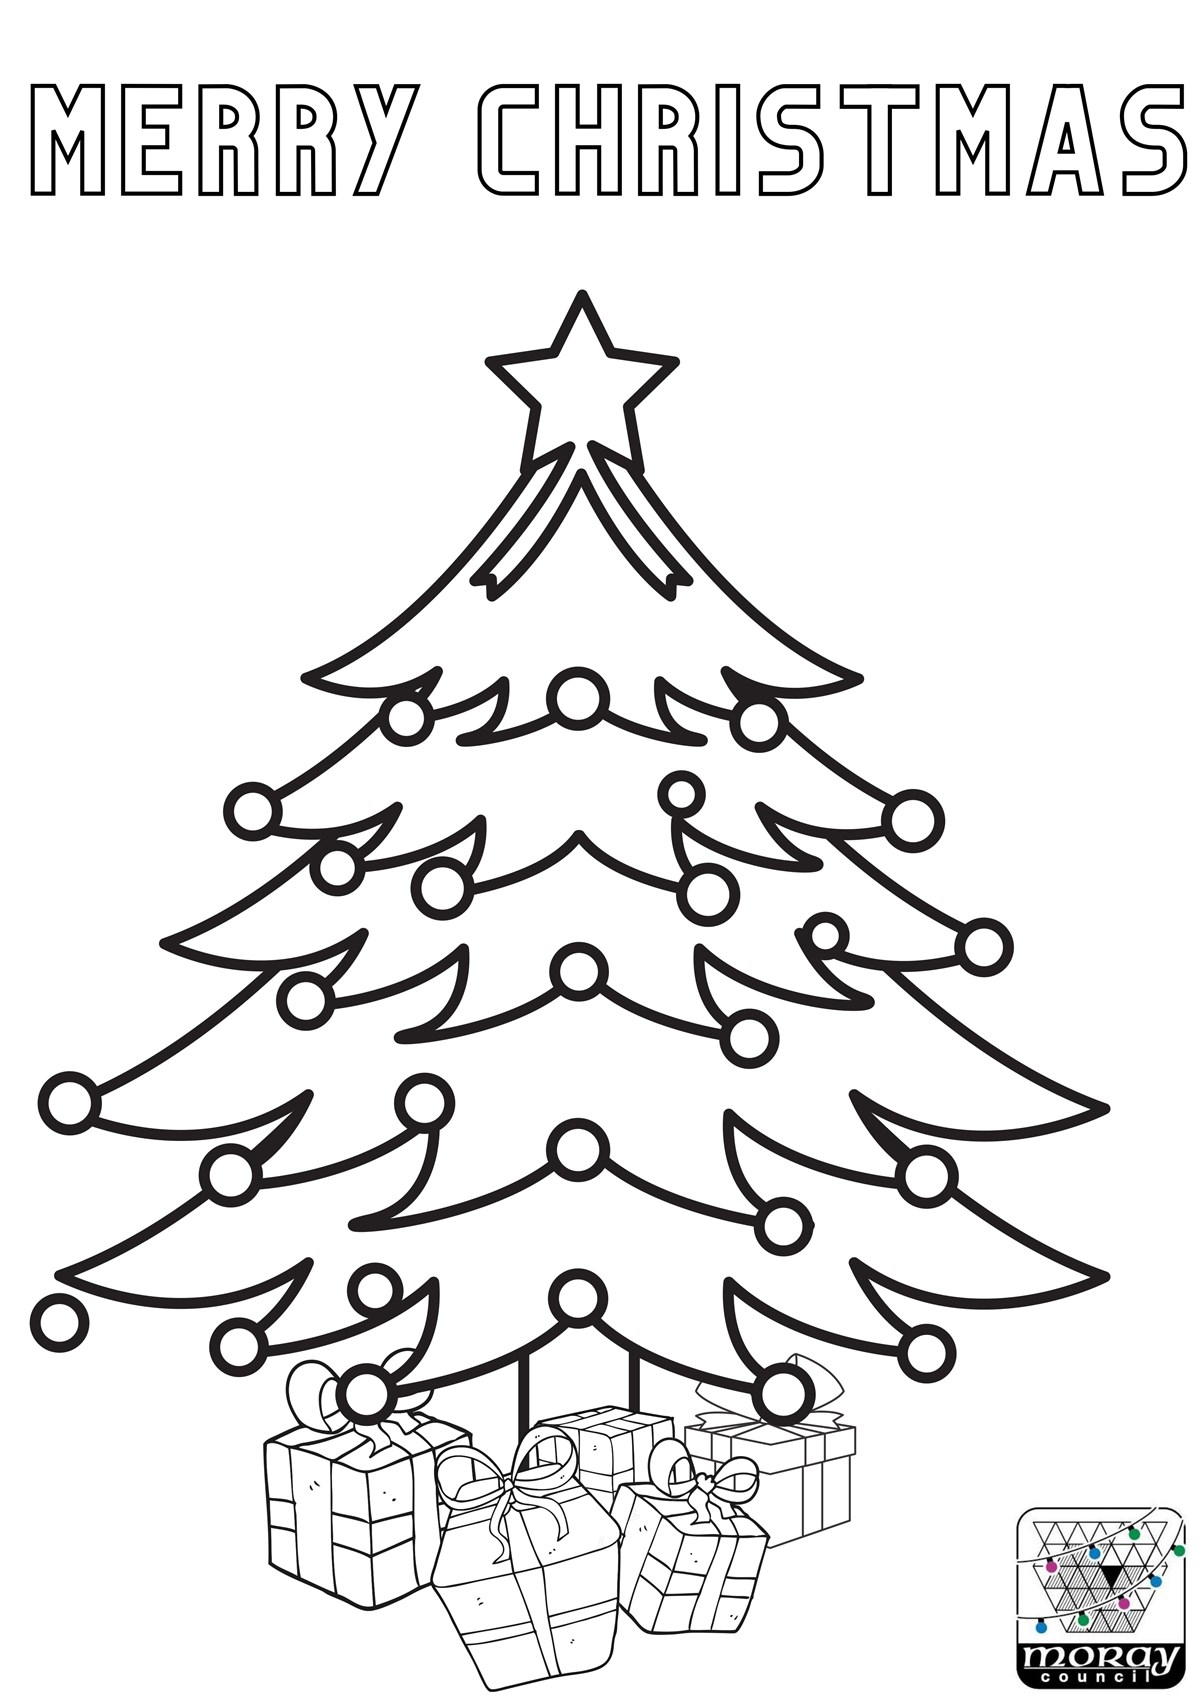 Colour me in Christmas tree template